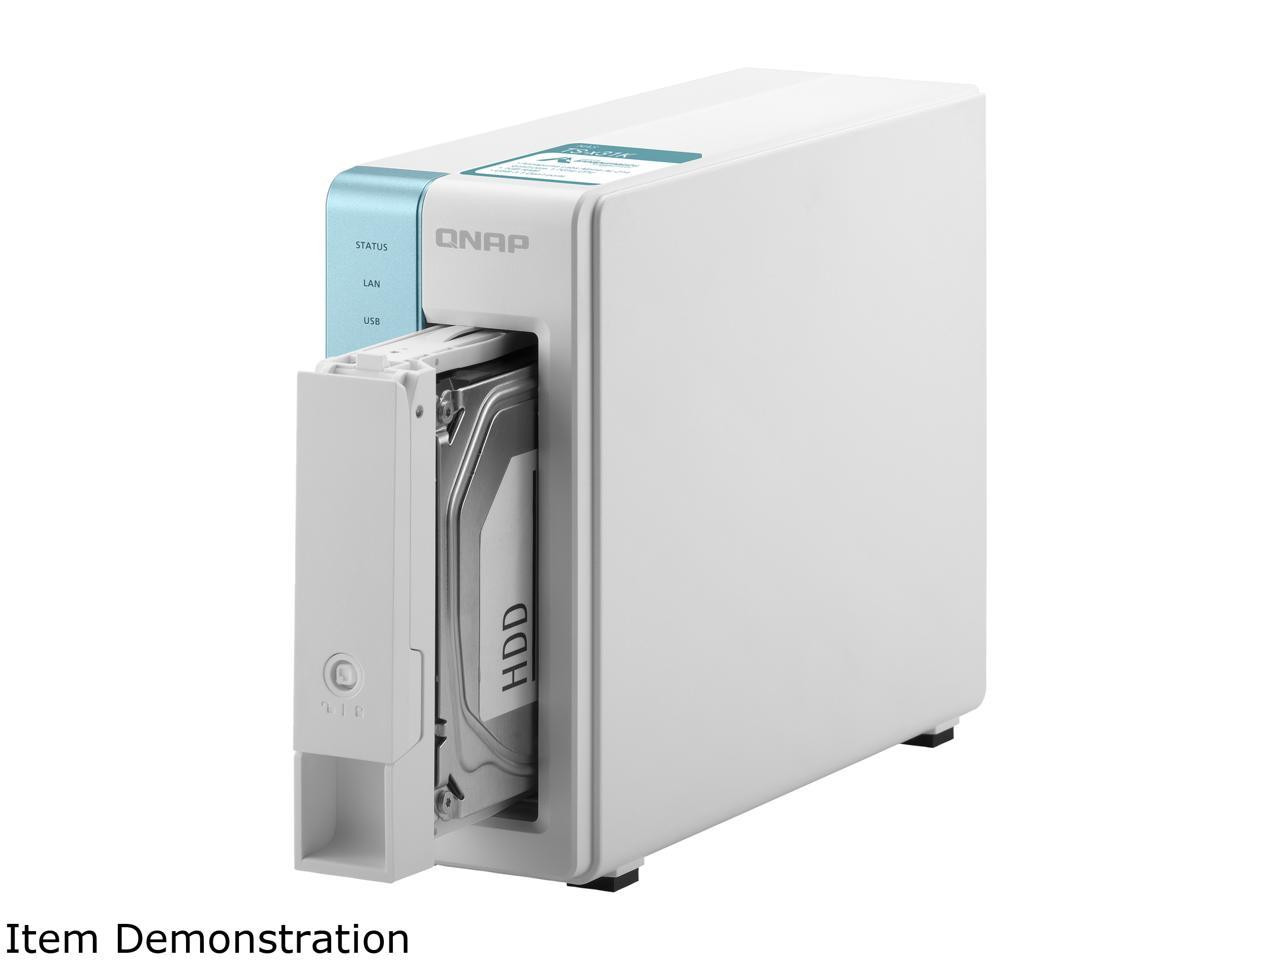 QNAP TS-131K-US 1-Bay Personal Cloud NAS for Backup and Data Sharing. Annapurna Labs 4-core 1.7GHz, 1GB RAM